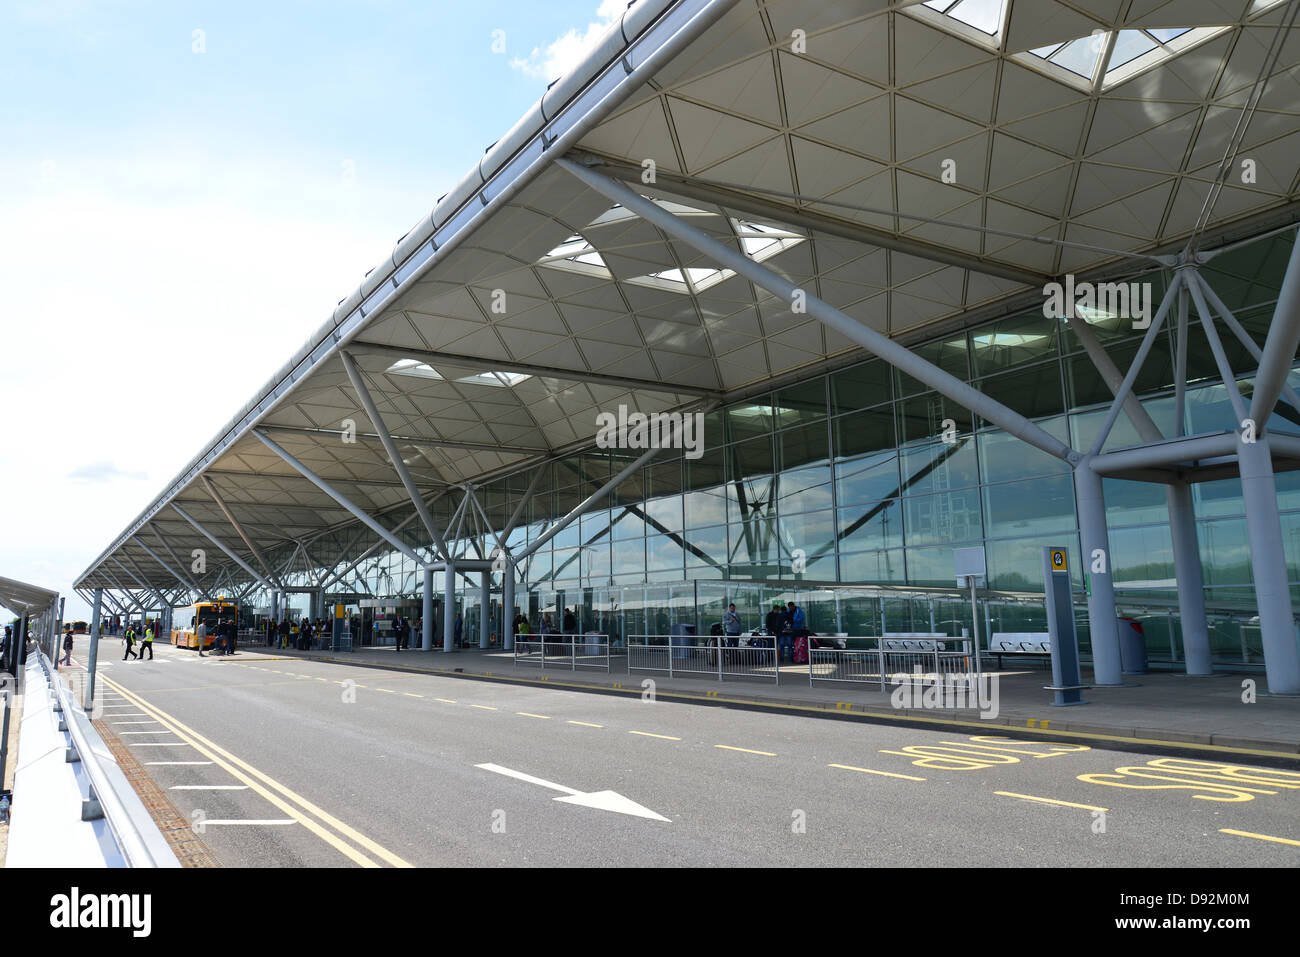 Departure level at Stansted Airport, Stansted Mountfitchet, Essex, England, United Kingdom Stock Photo